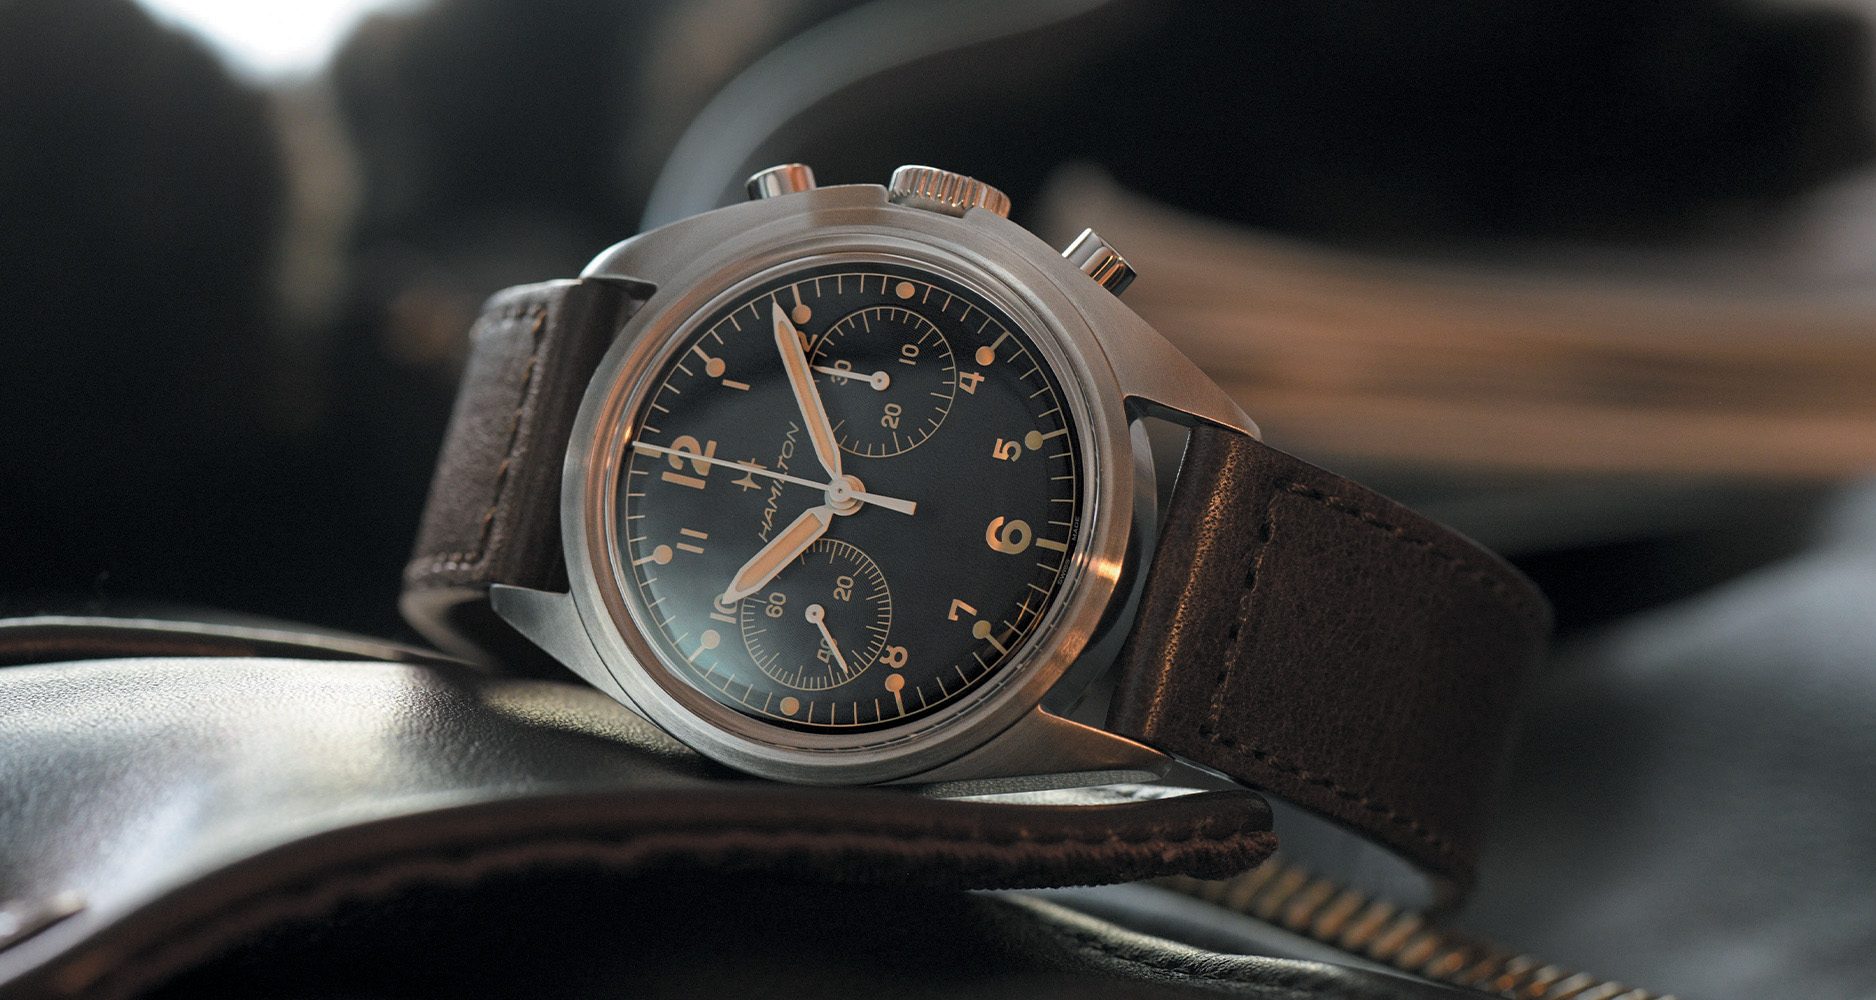 A re-issue of the Hamilton RAF Pilot’s Chronograph 924-3306, the Hamilton Pilot Pioneer Mechanical Chronograph is very similar to the original Fab Four watch.